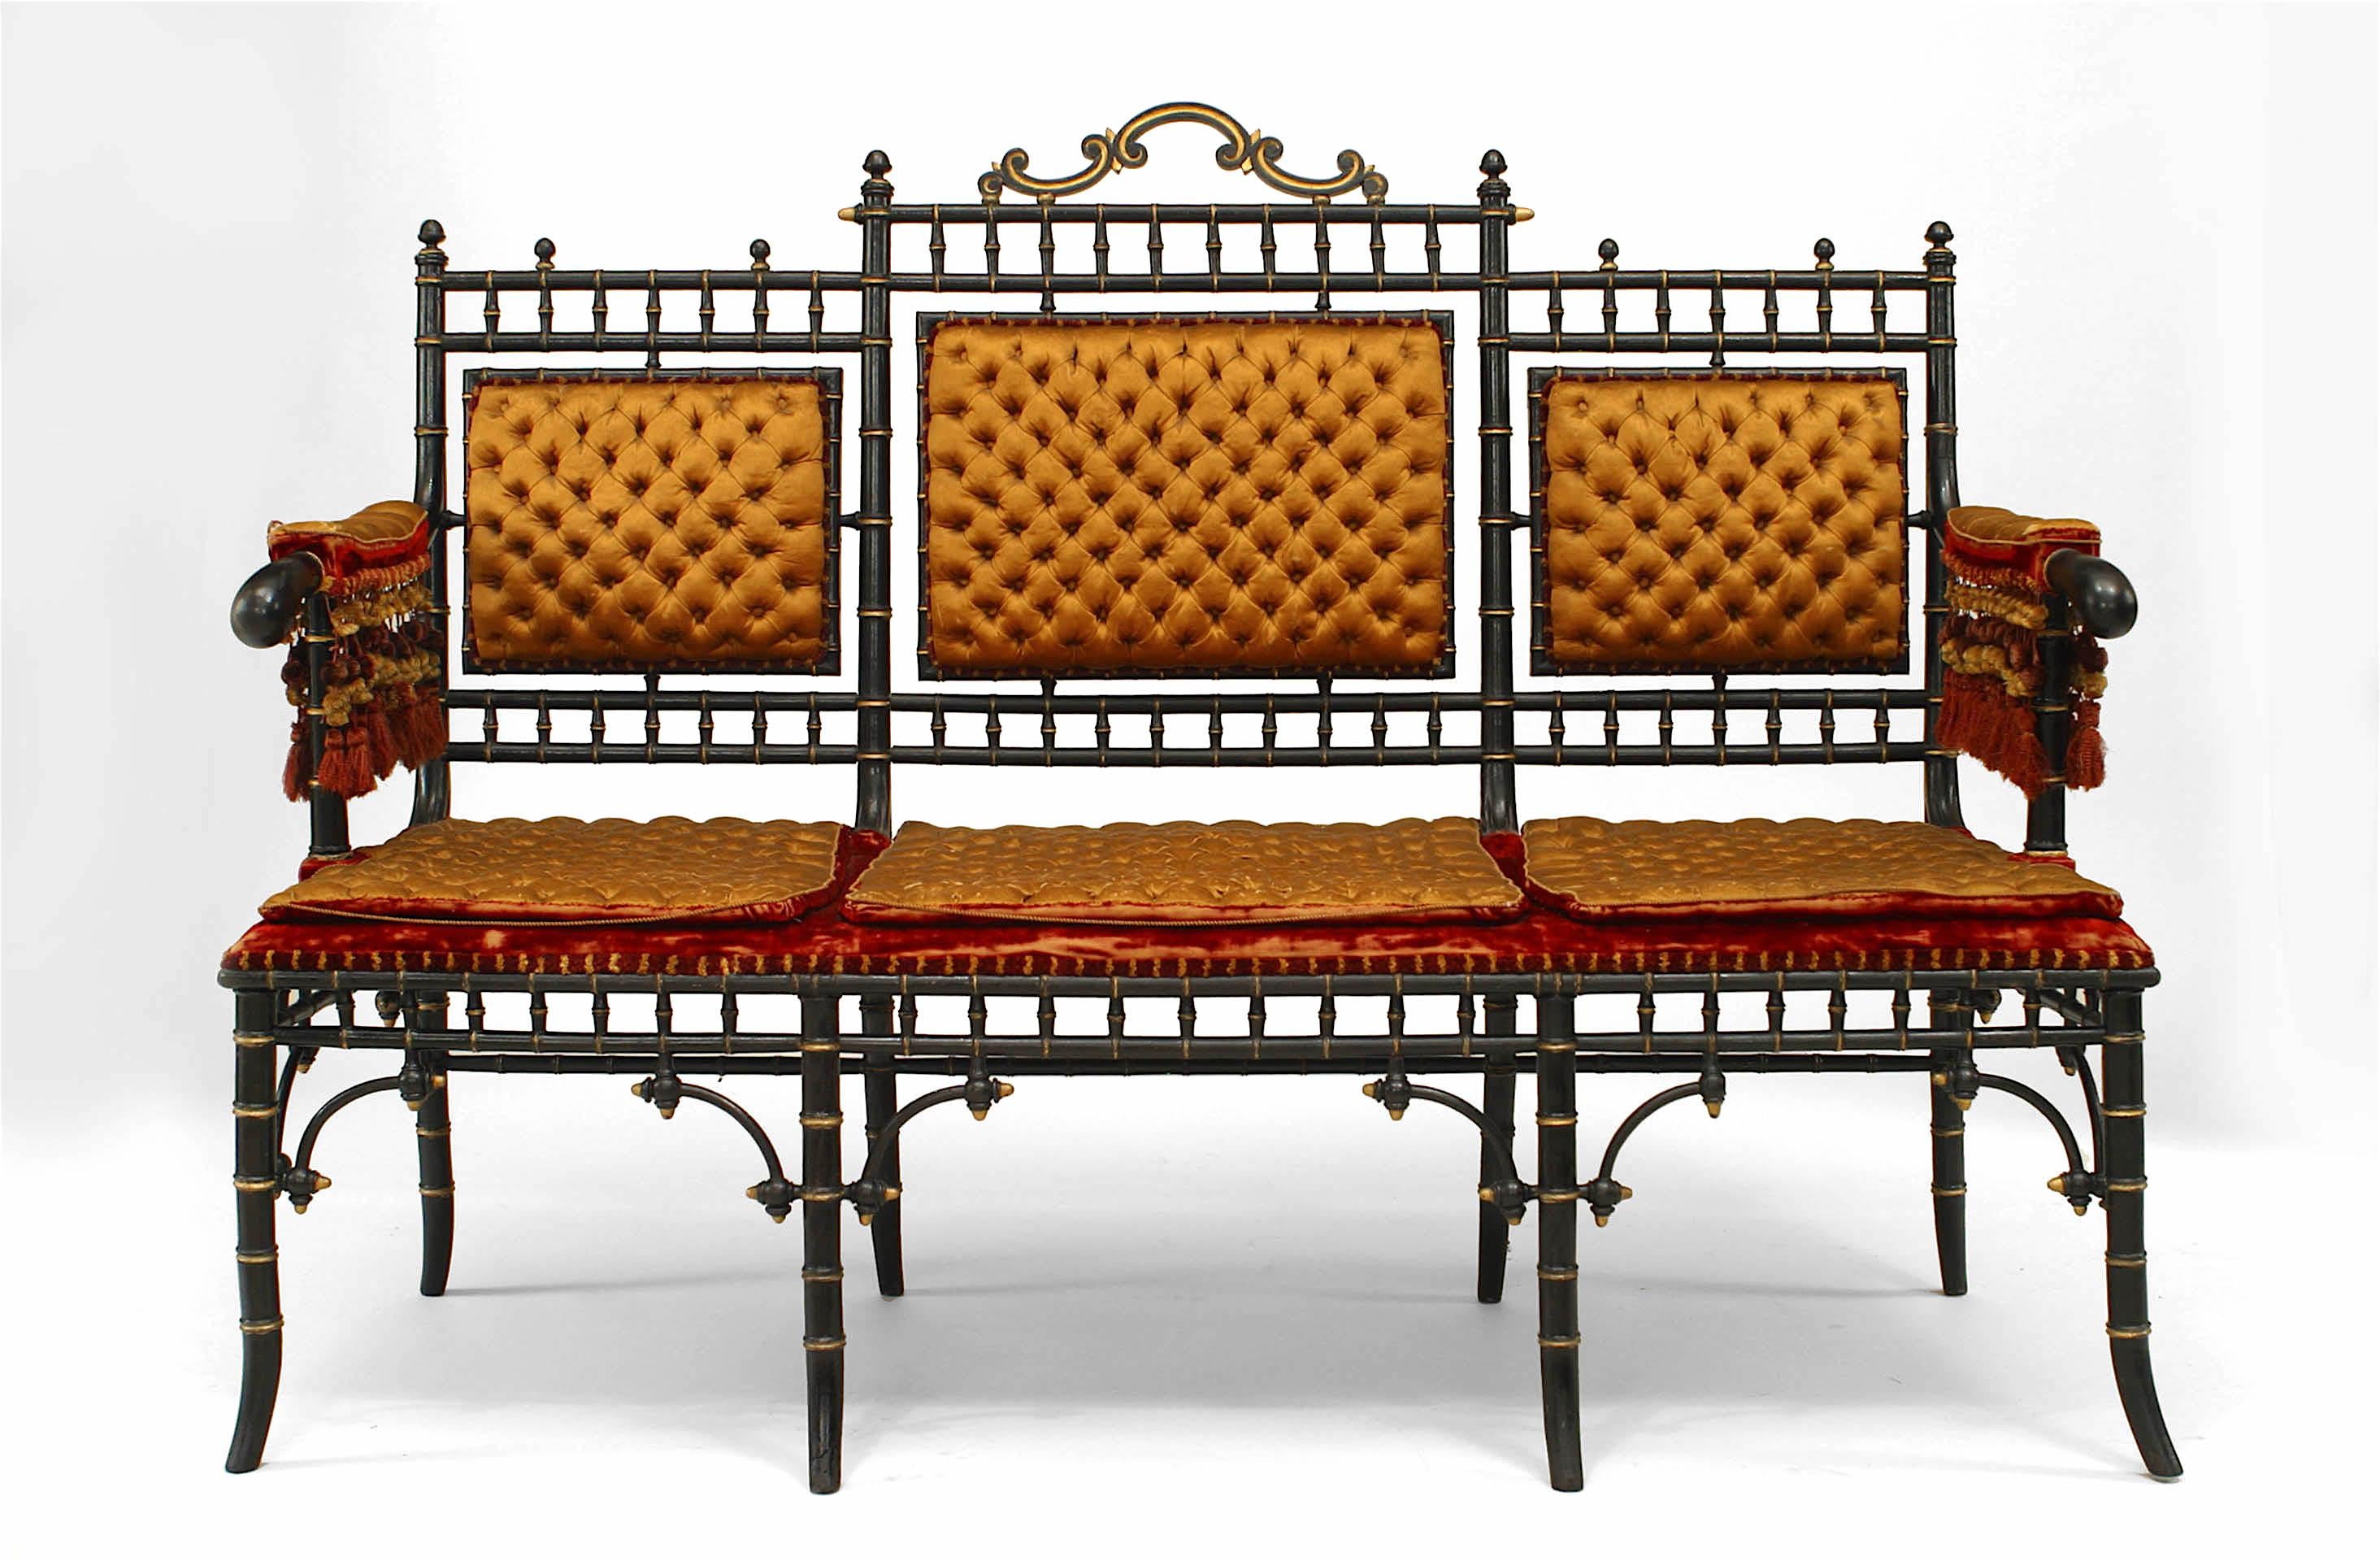 French Victorian faux-bamboo design ebonized and gilt-trimmed settee with tufted gold upholstery and fringe (matching stools: 052463)
